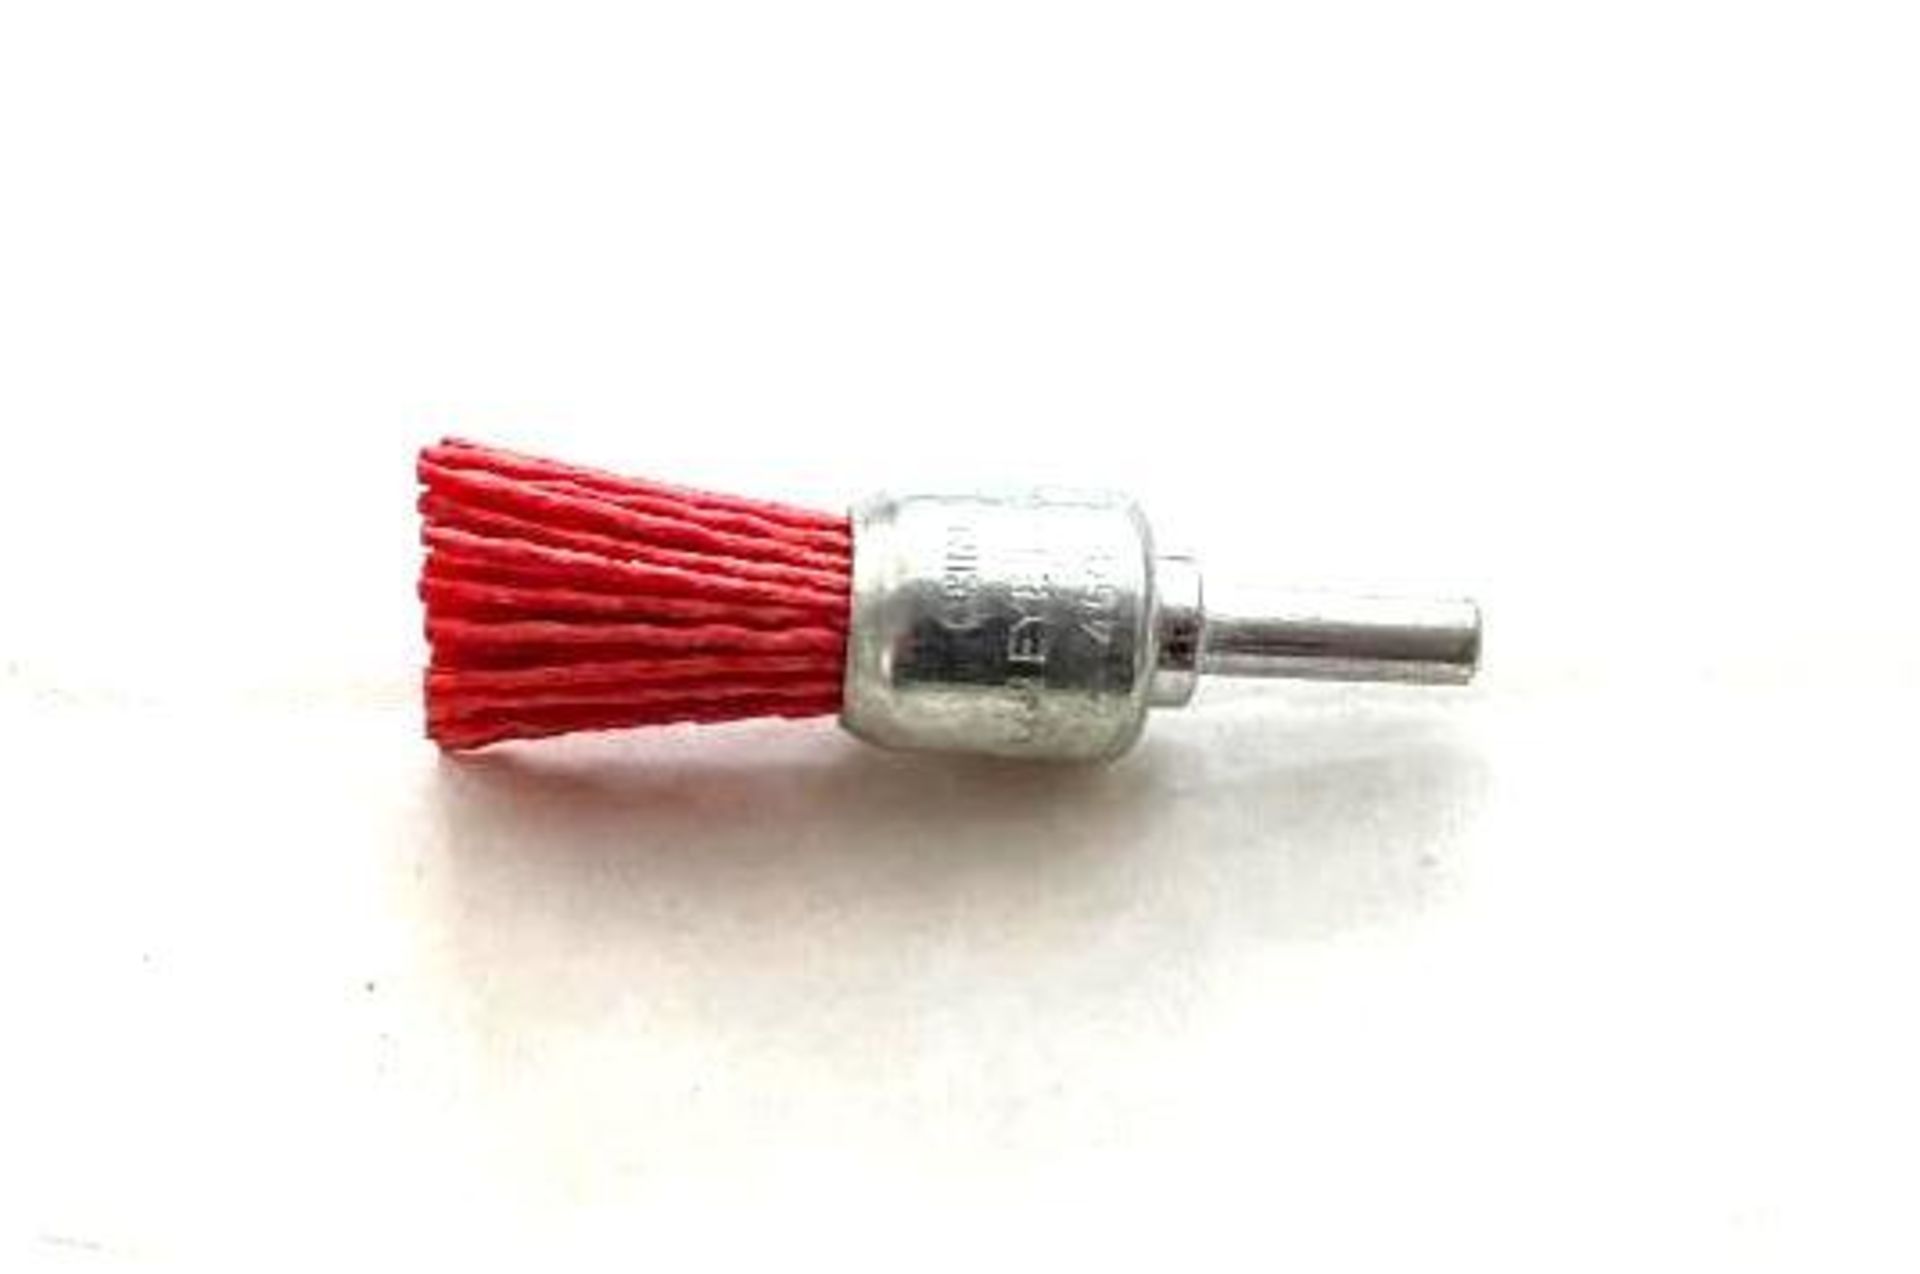 400CT 3/4" NYLON END COARSE BRUSH WITH 1/4" SHANK BRAND/MODEL EAZYPOWER 81045 ADDITIONAL INFO TOTAL